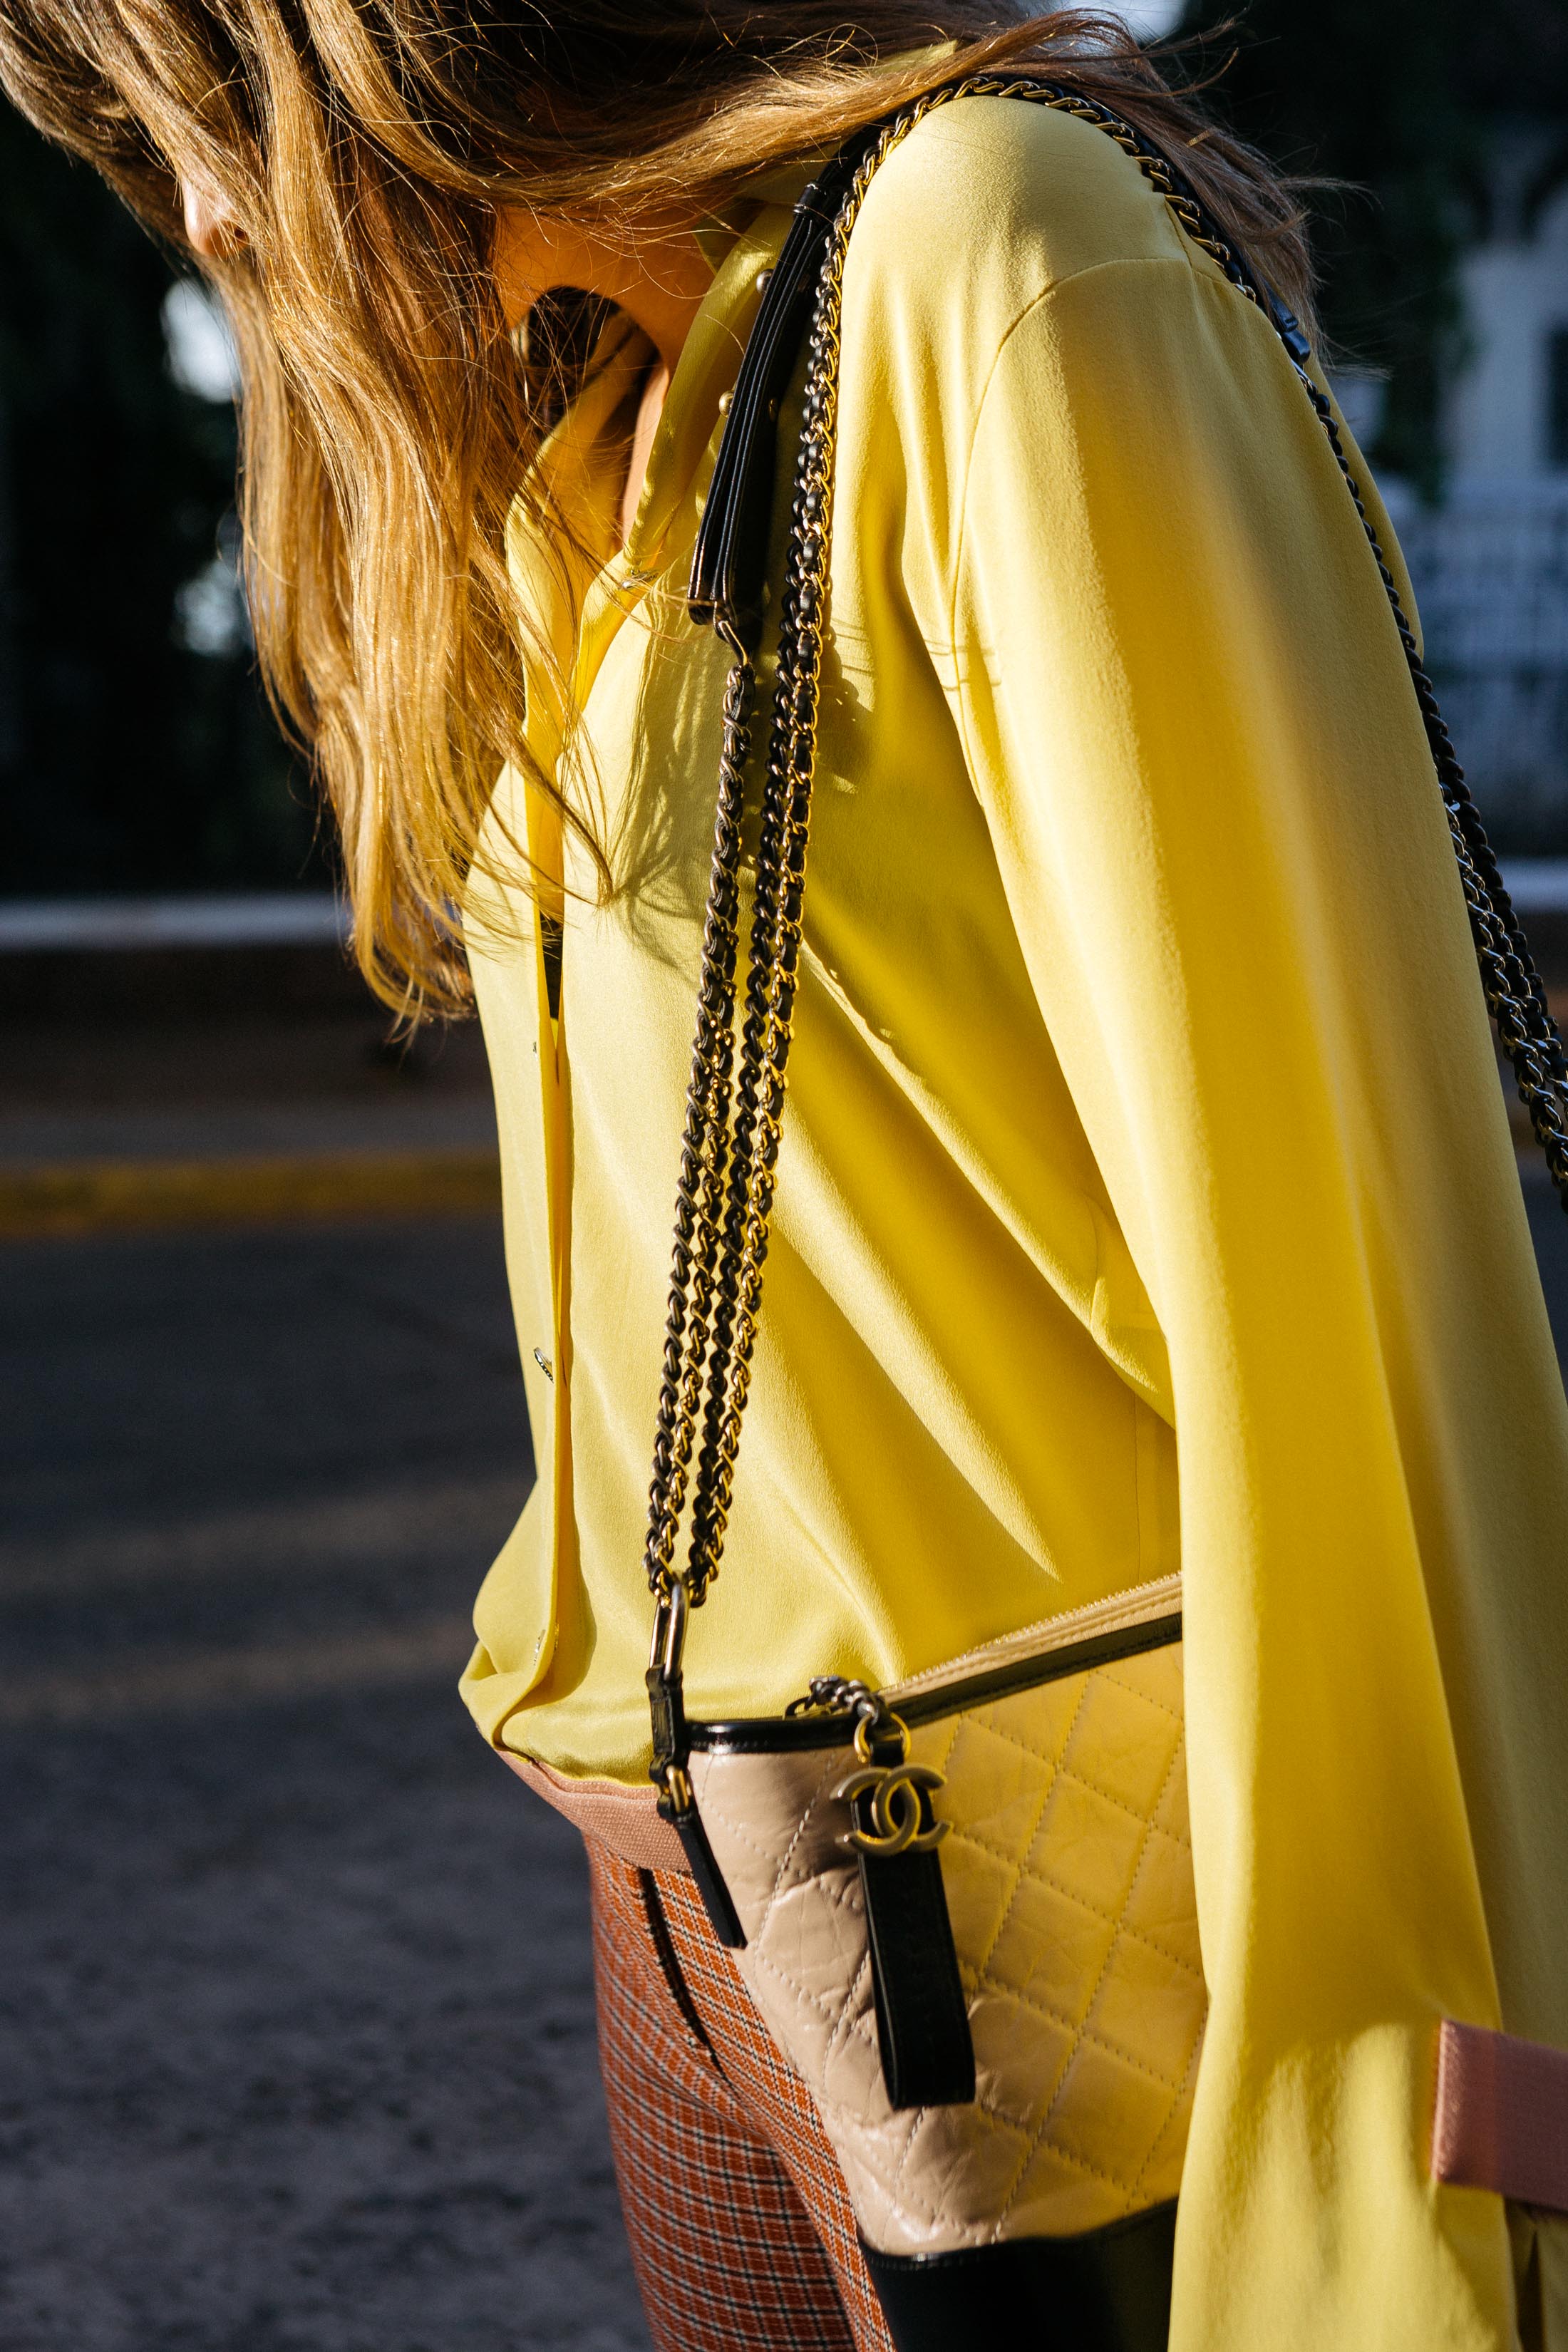 Maristella wears a Chanel Spring 2017 yellow silk blouse with the new Chanel Gabrielle shoulder bag